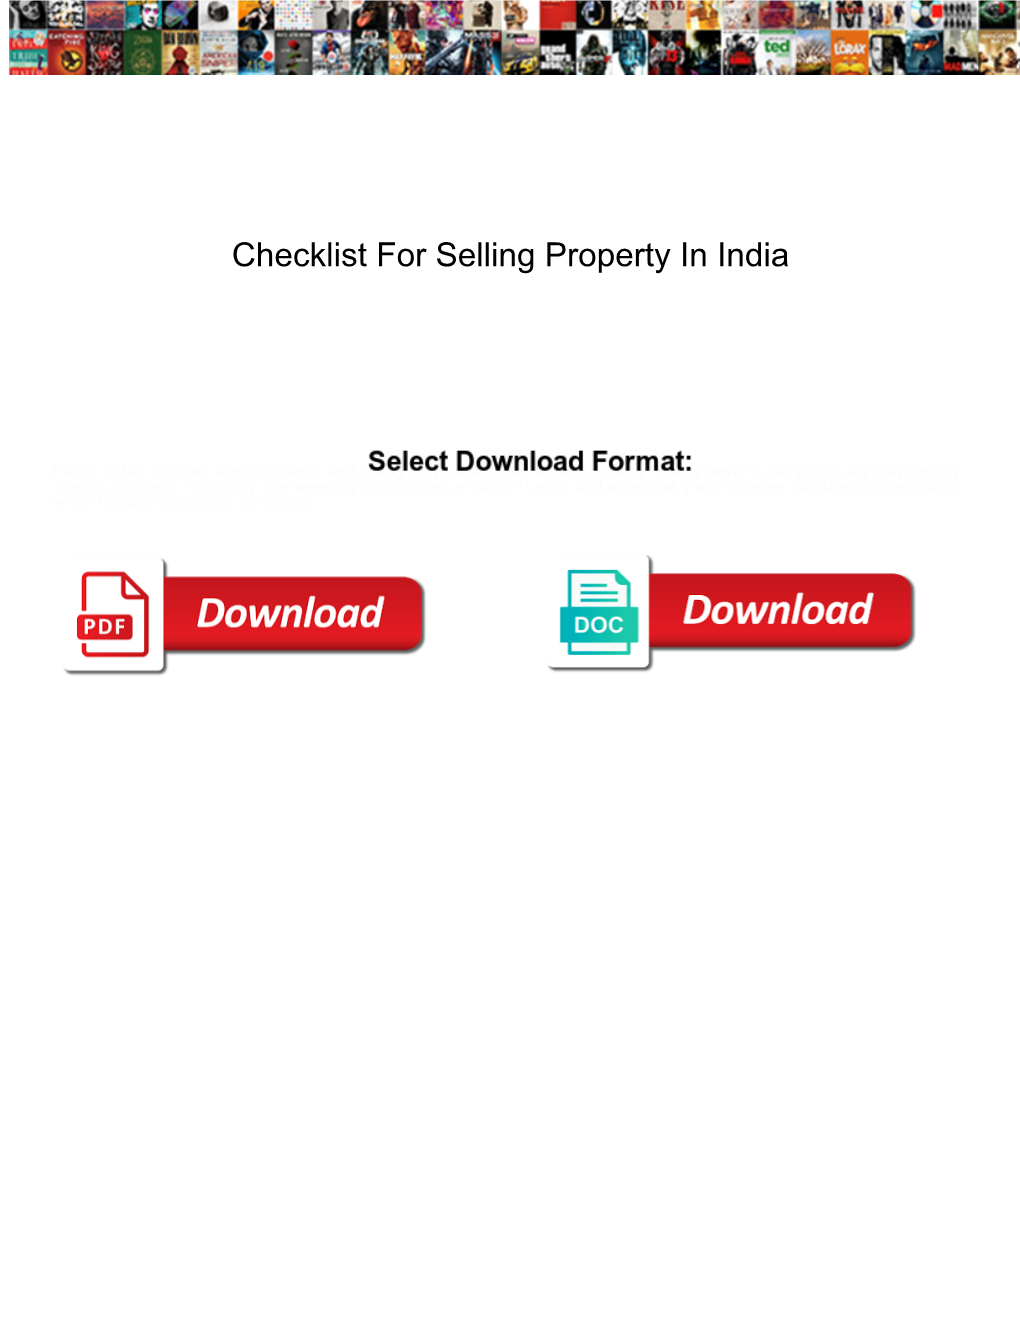 Checklist for Selling Property in India